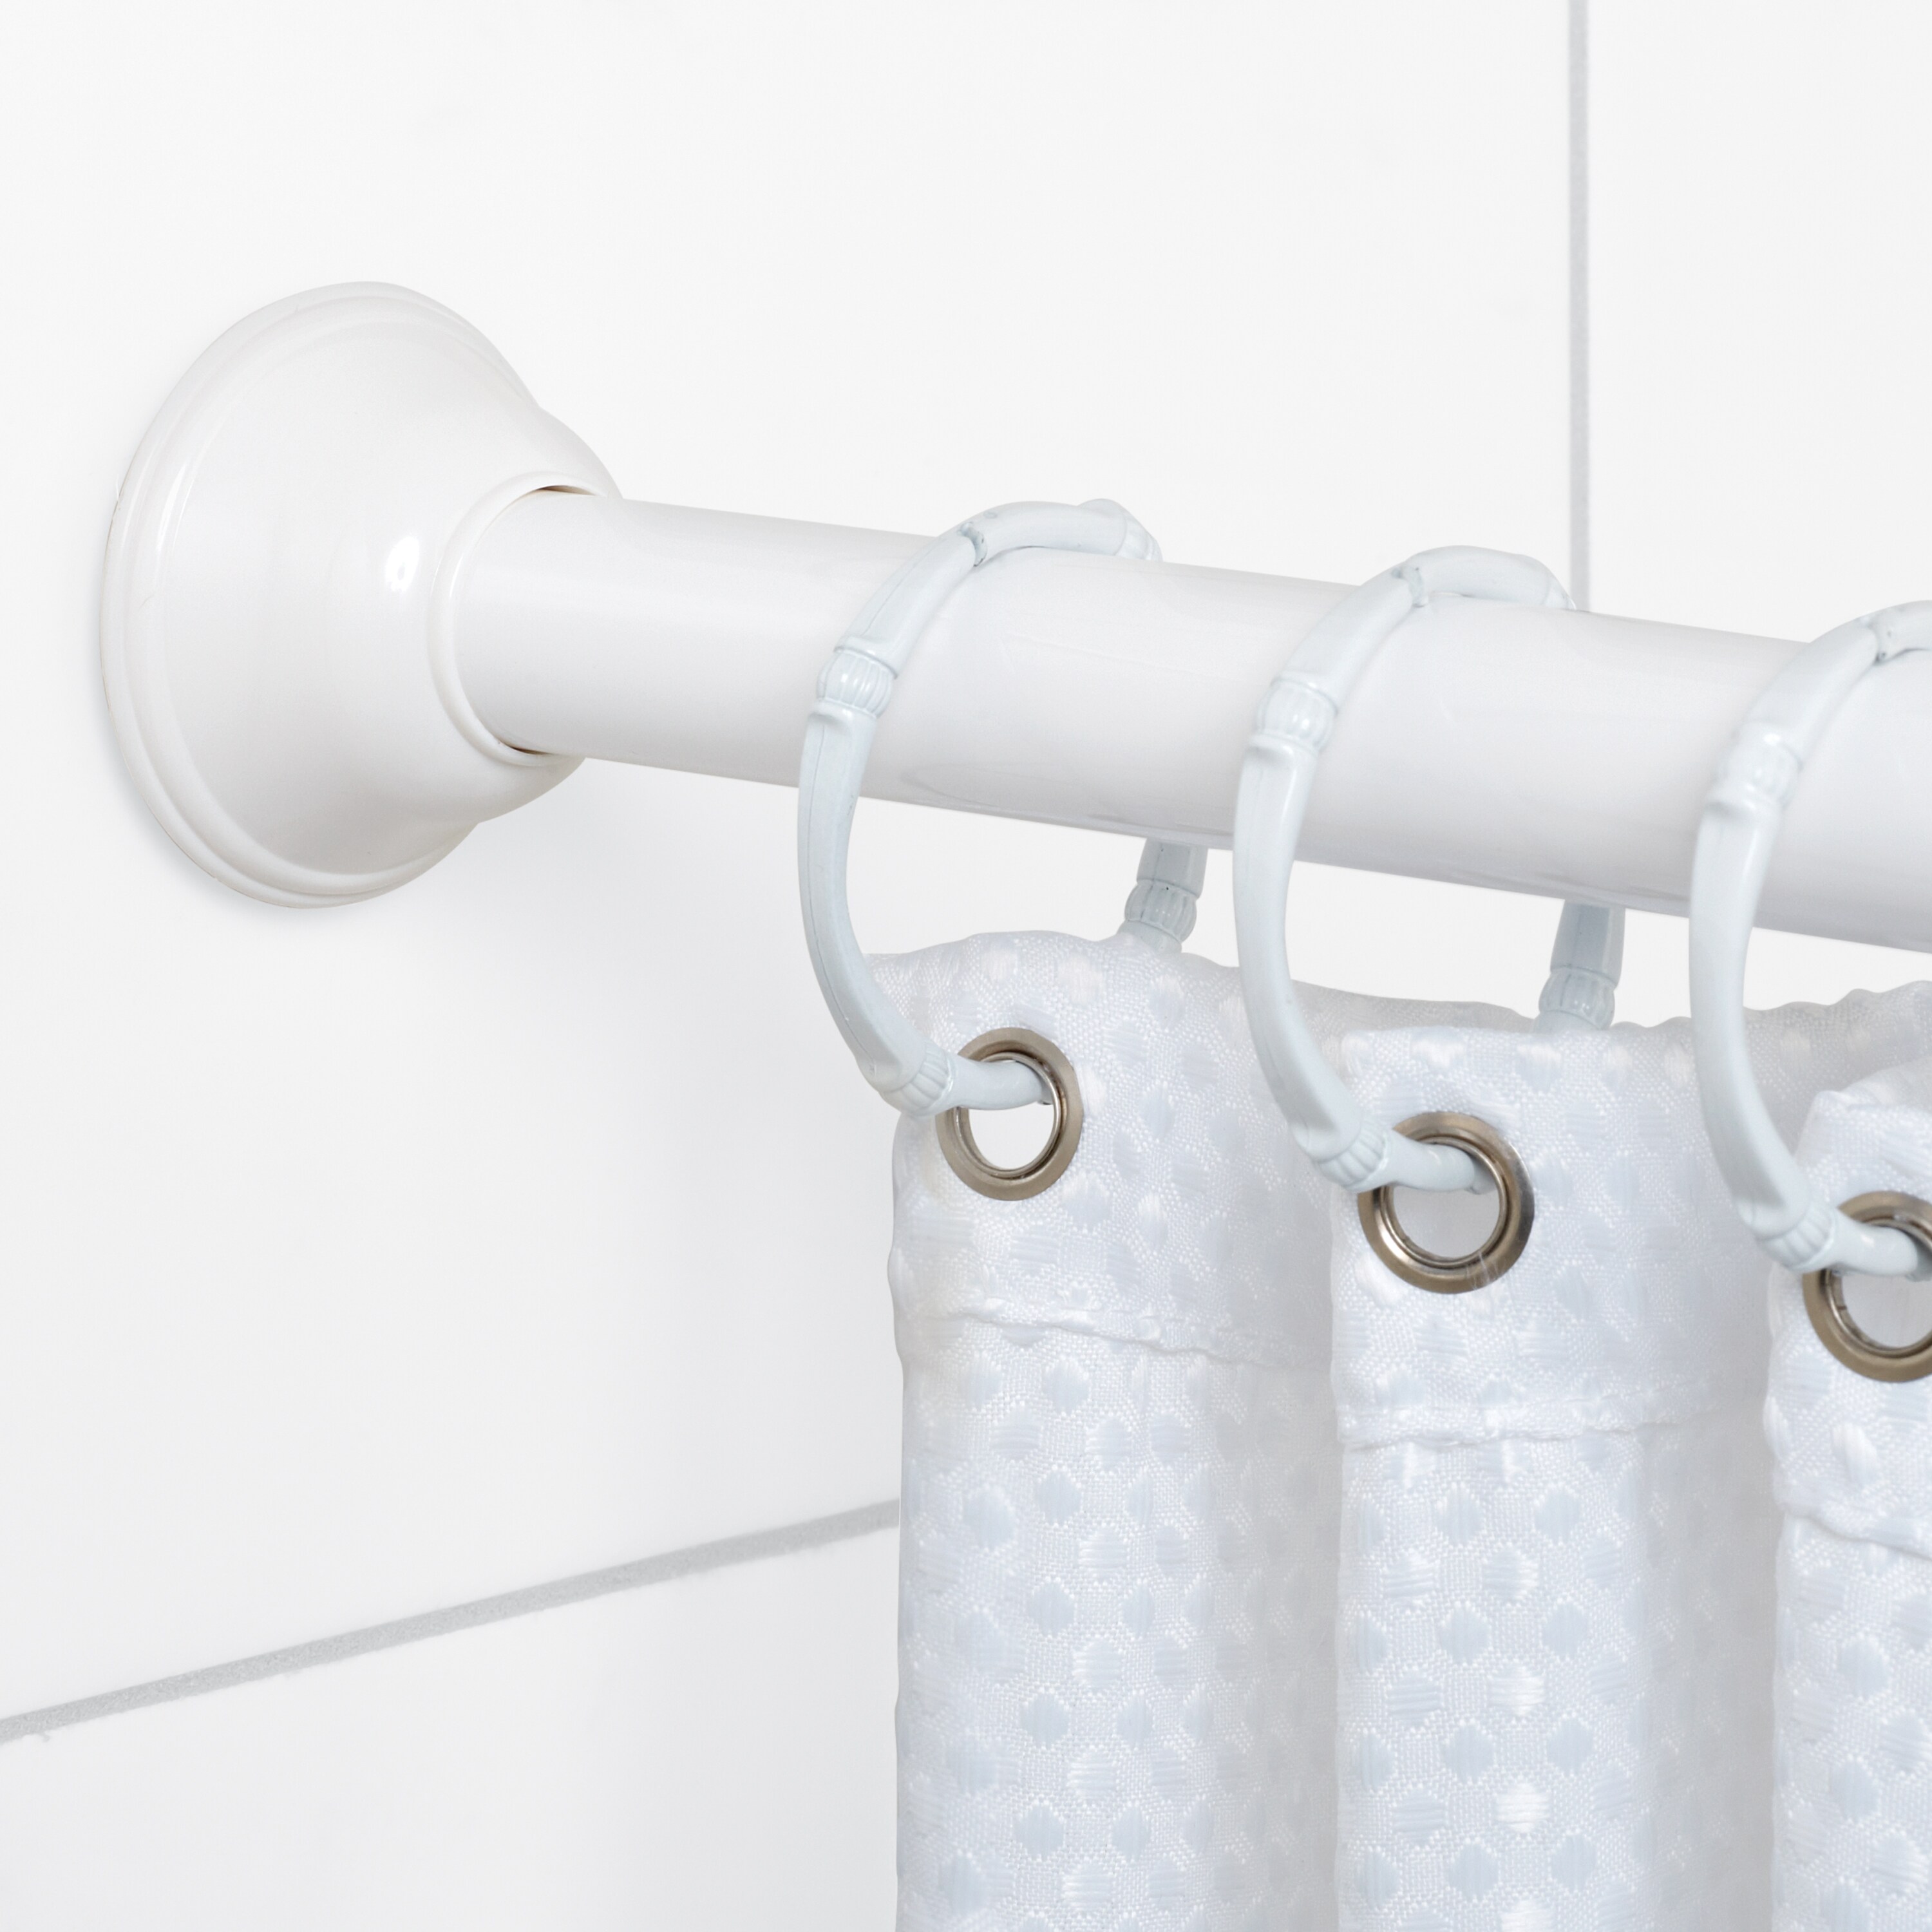 43 Inches to 72 Inches,... Zenna Home 771SS Tension Bathroom Shower Curtain Rod 